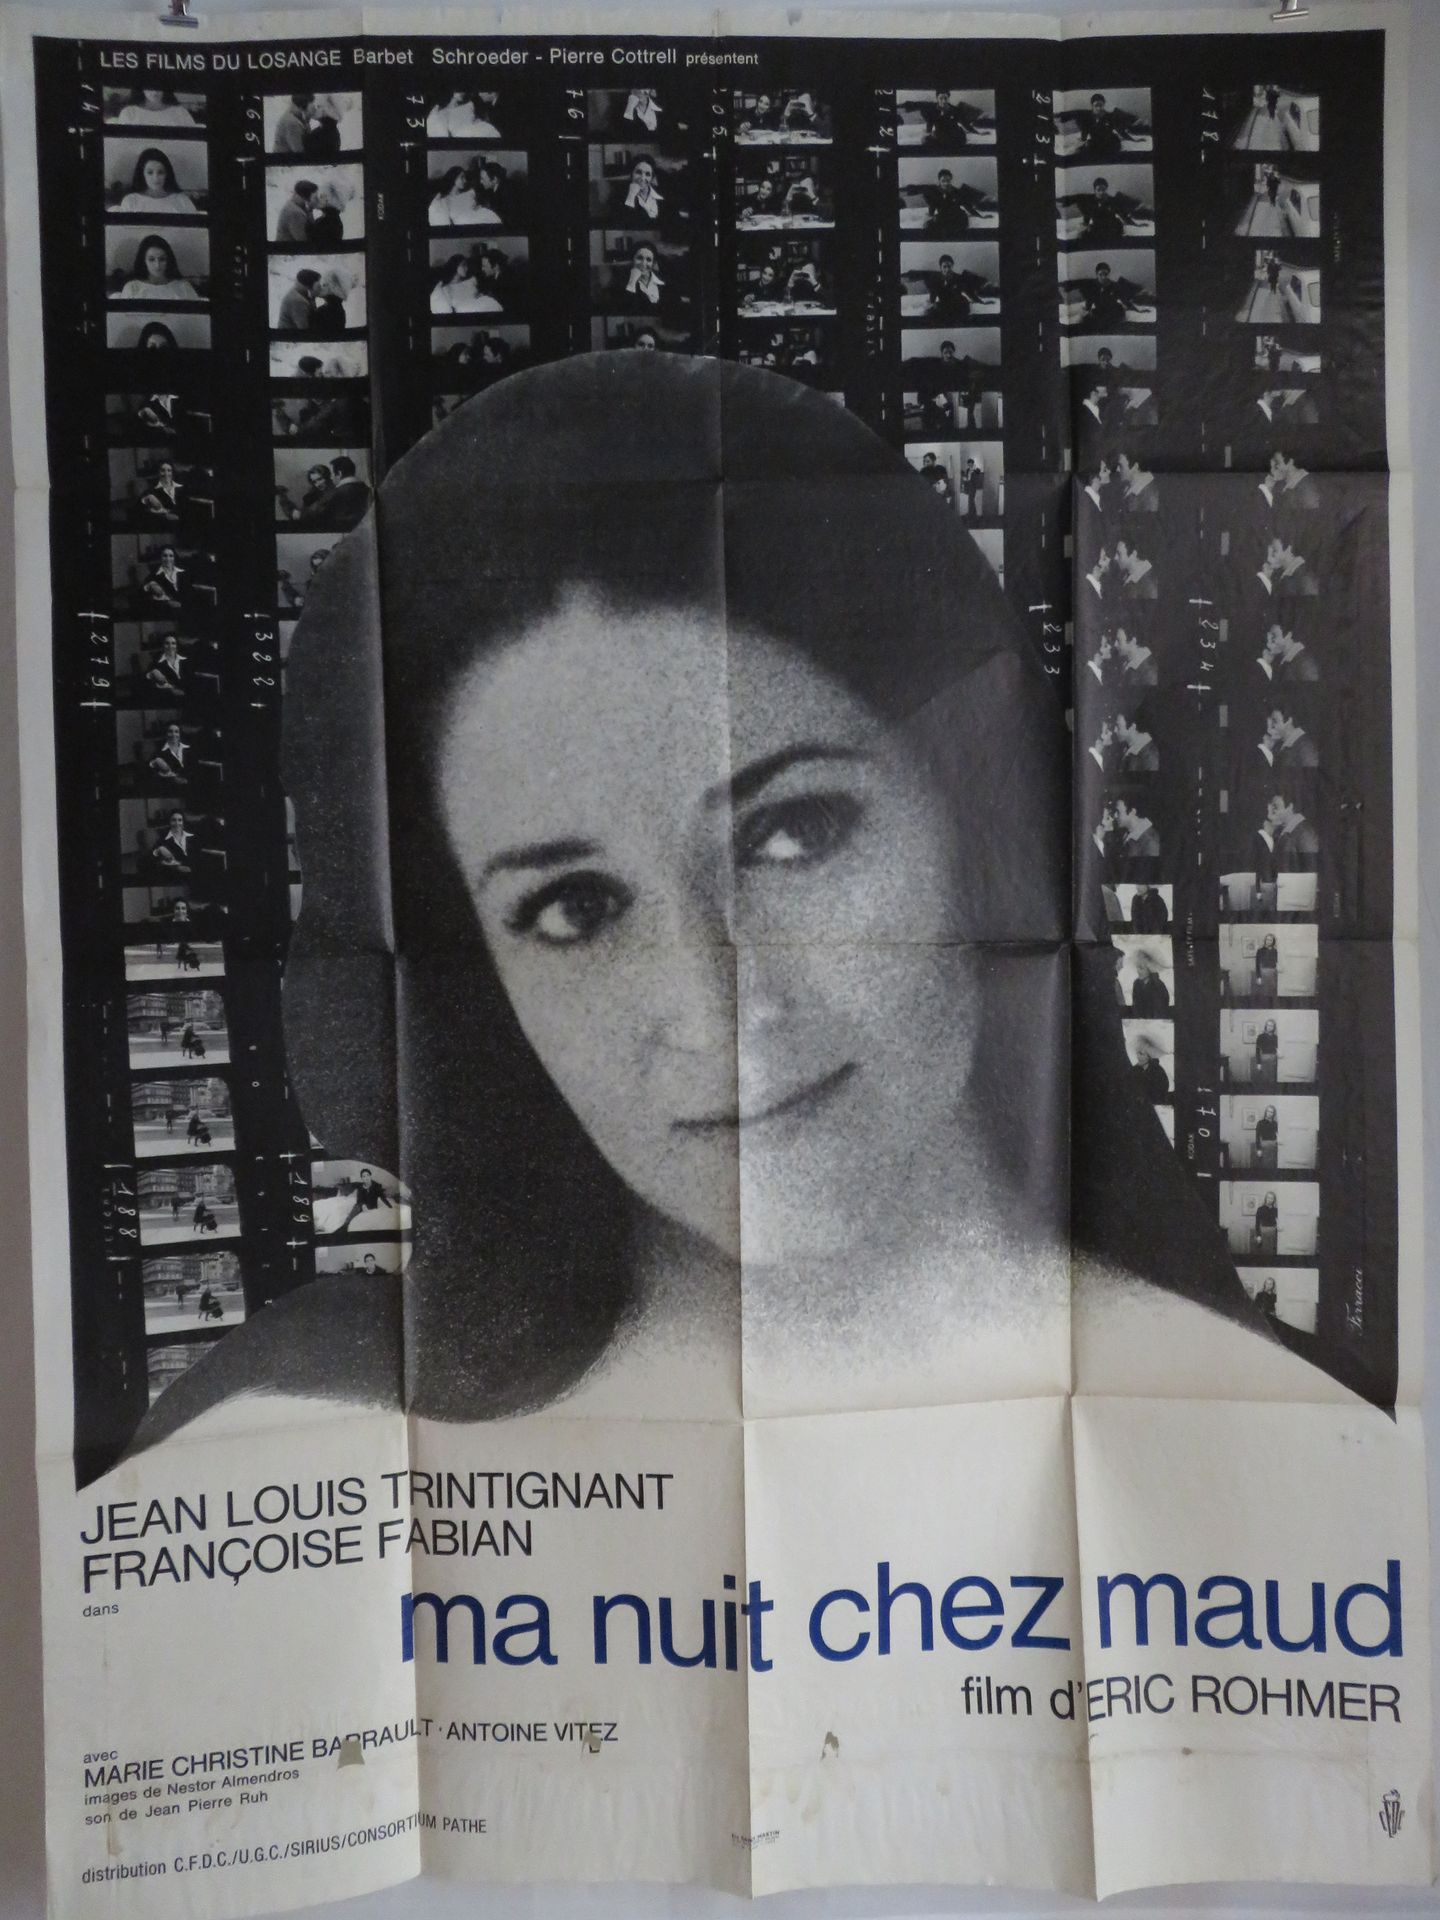 Null "MA NUIT CHEZ MAUDE" (1969) by Eric ROHMER with Françoise Fabian, Jean Loui&hellip;